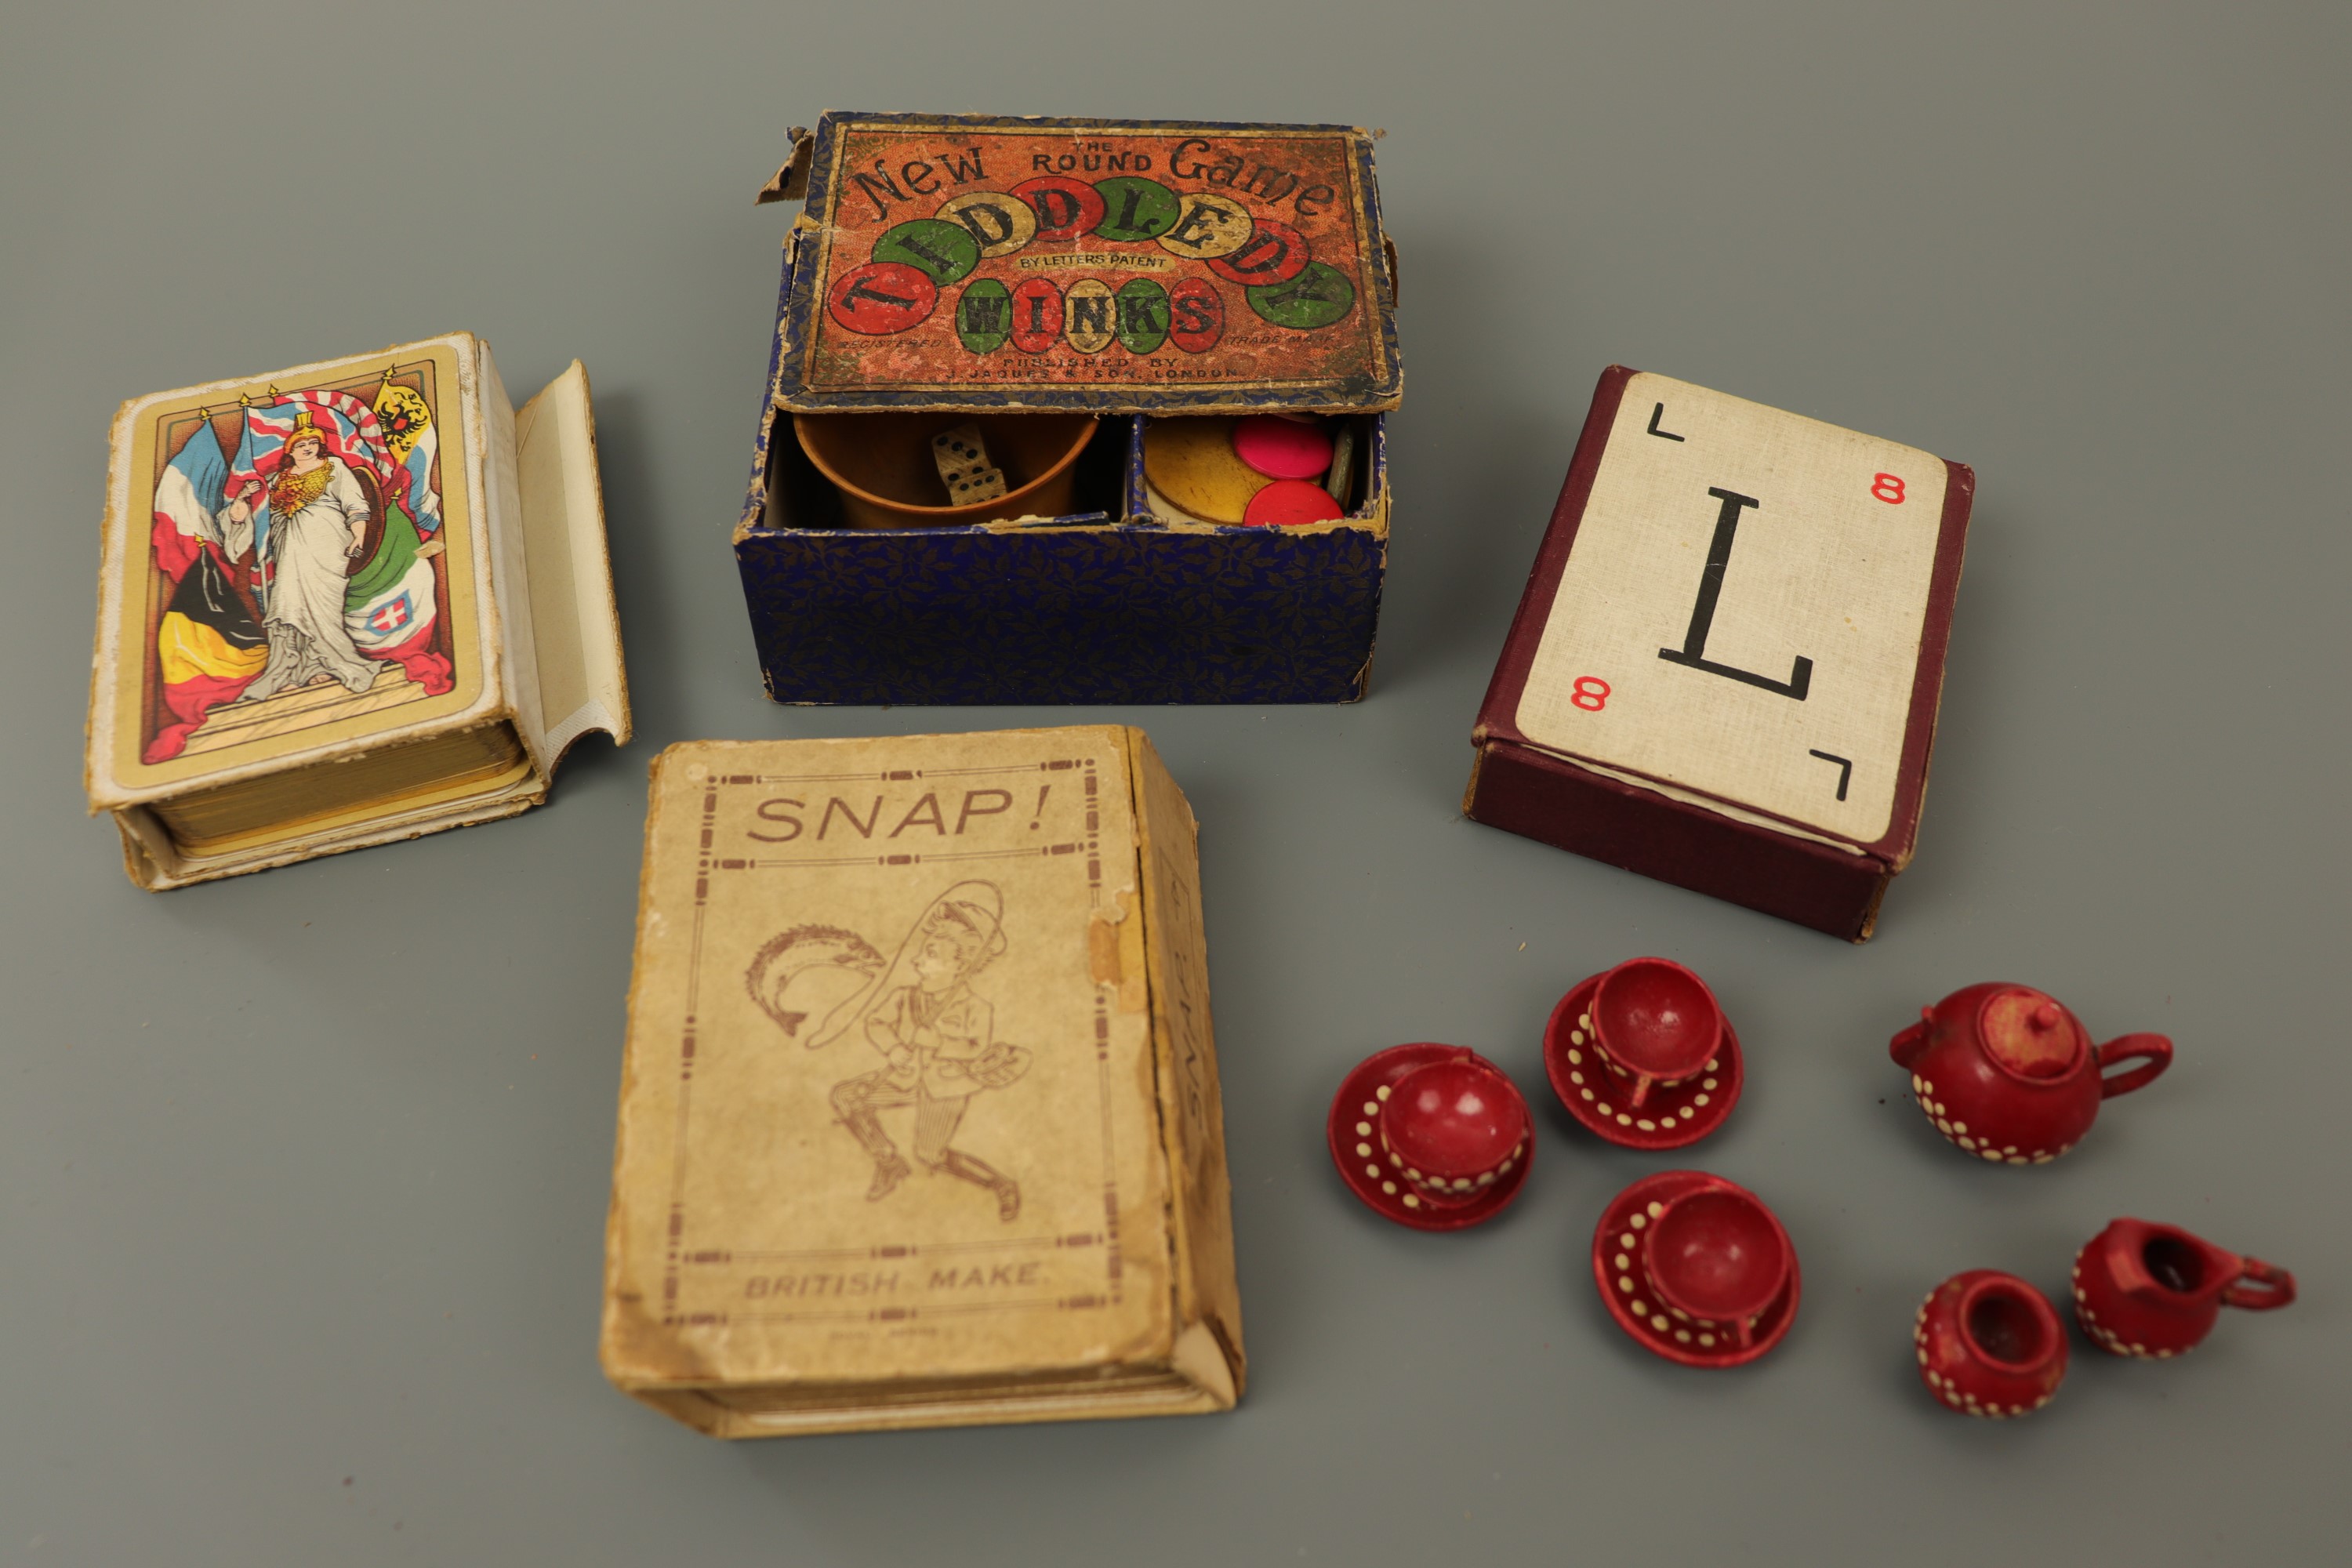 Vintage toys and games, including a miniature tea service, a boxed game of tiddlywinks and further